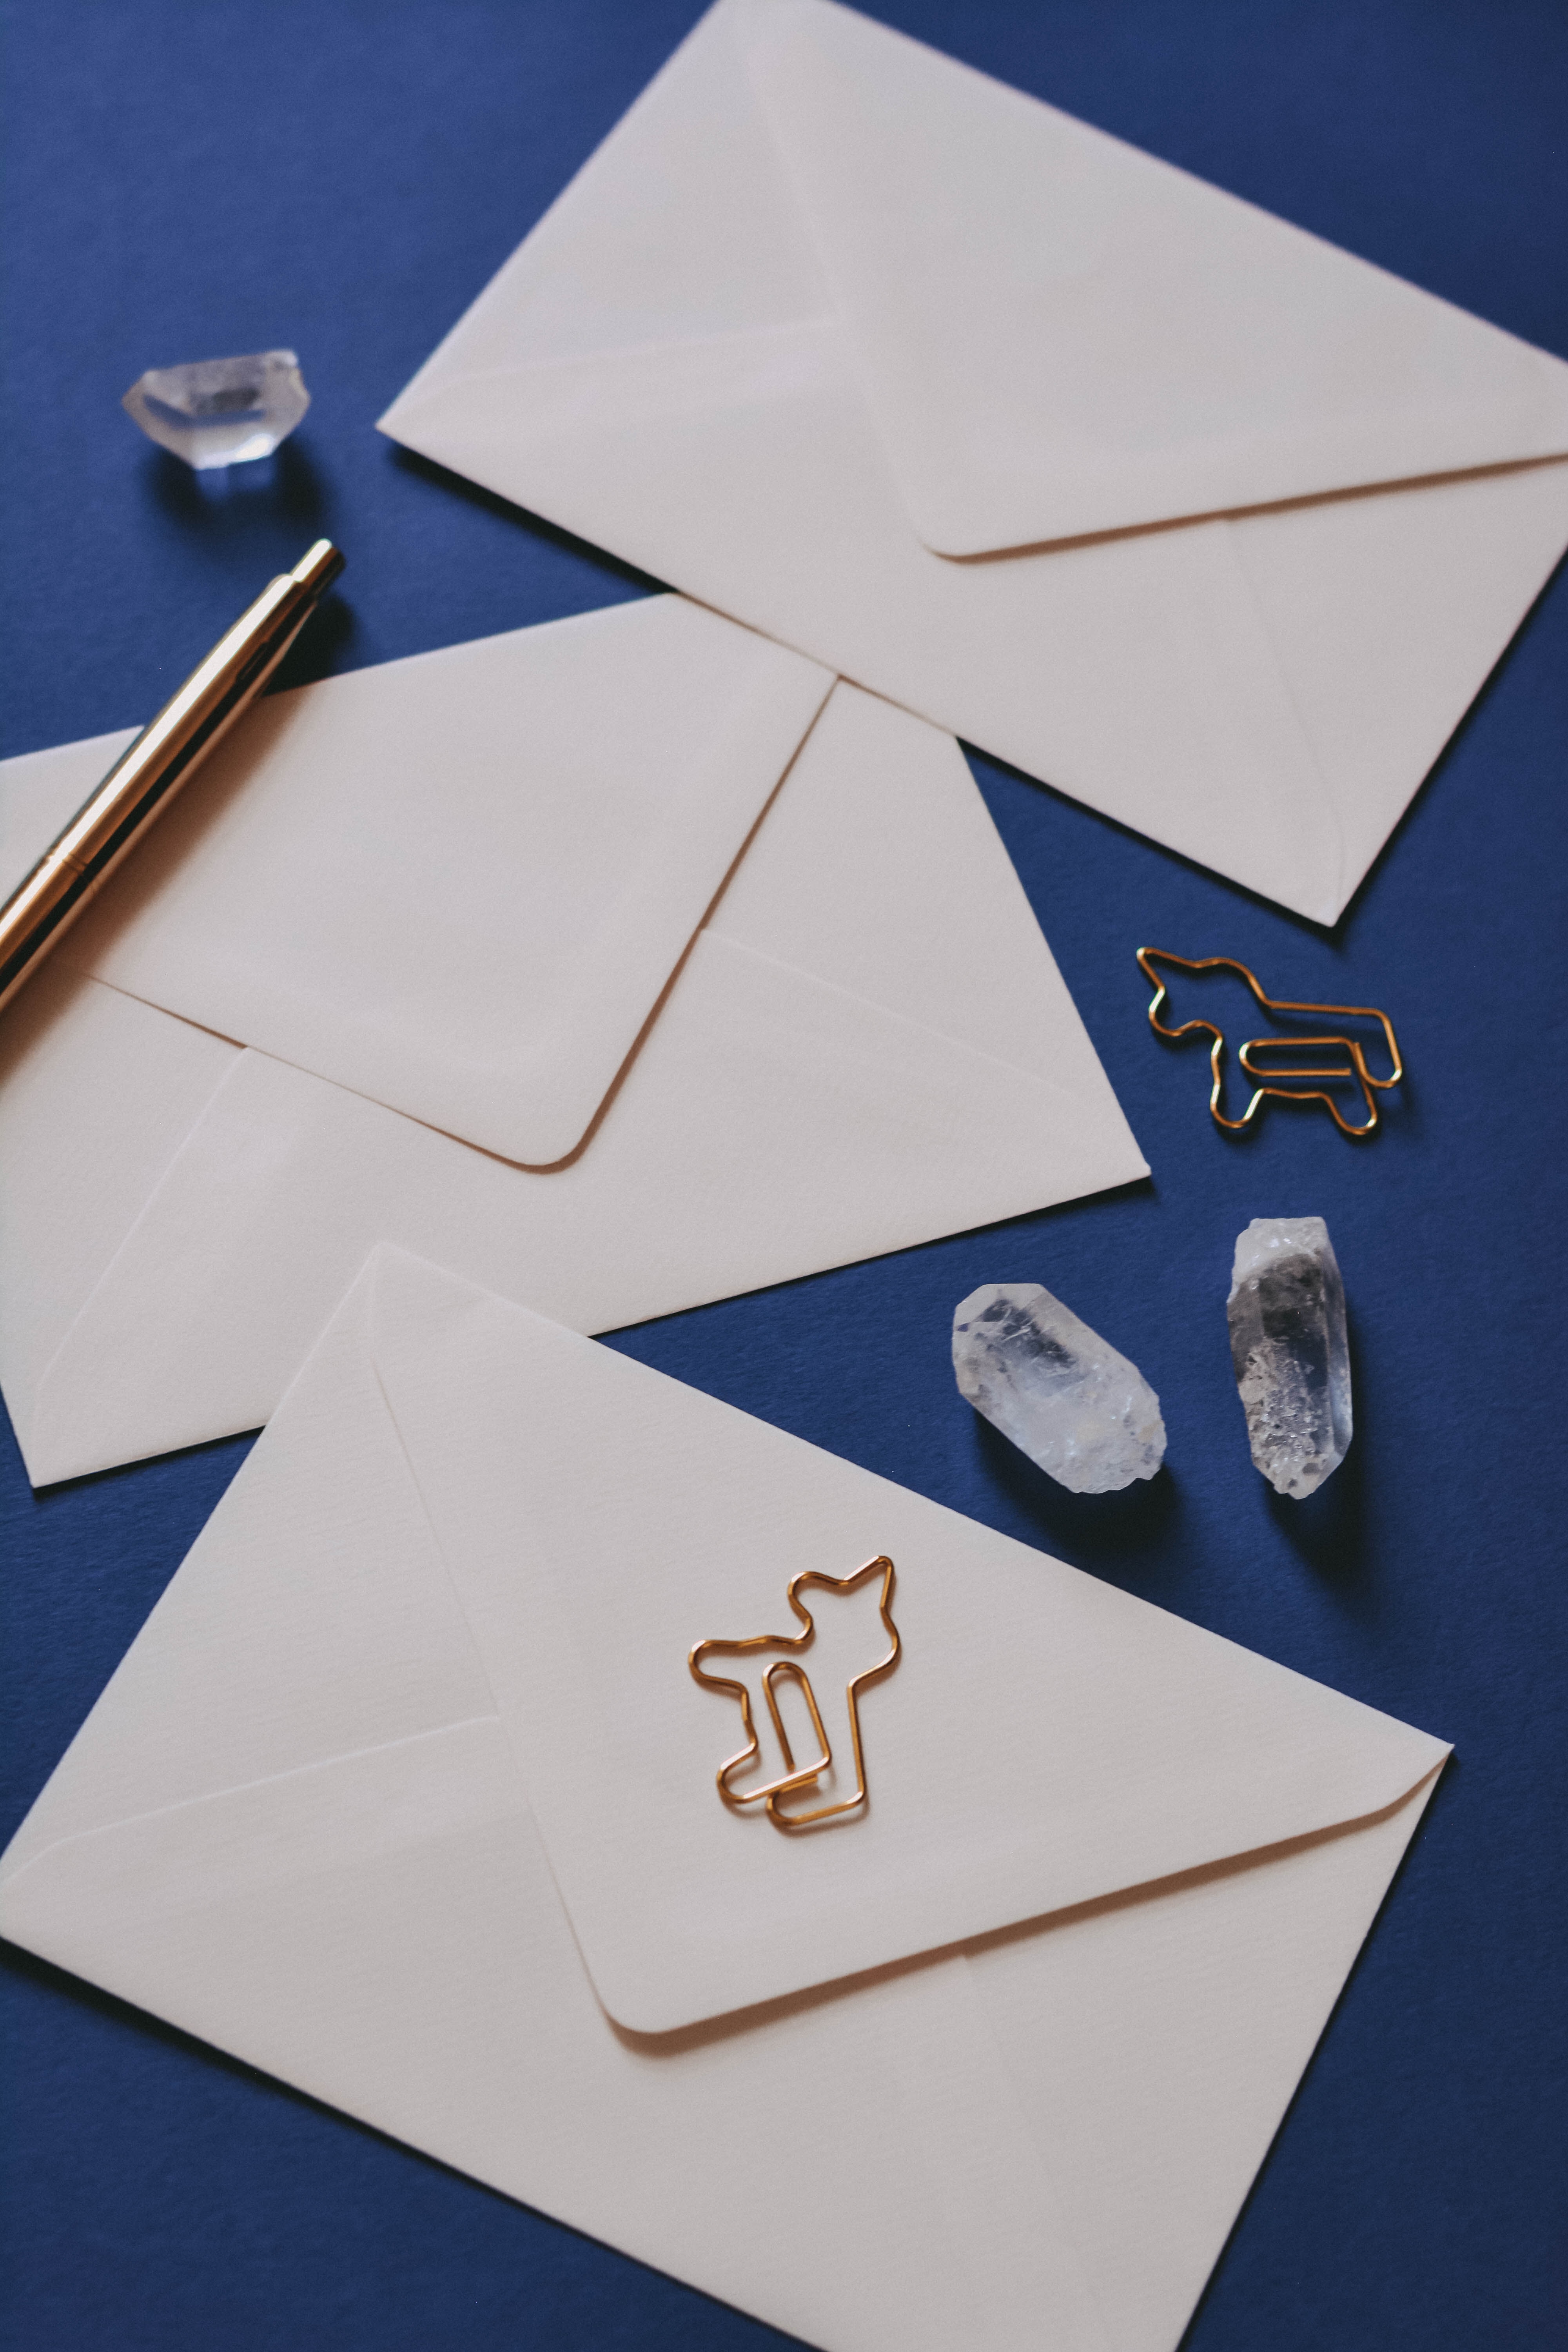 A gold pen, envelope, and crystals arranged on a surface.